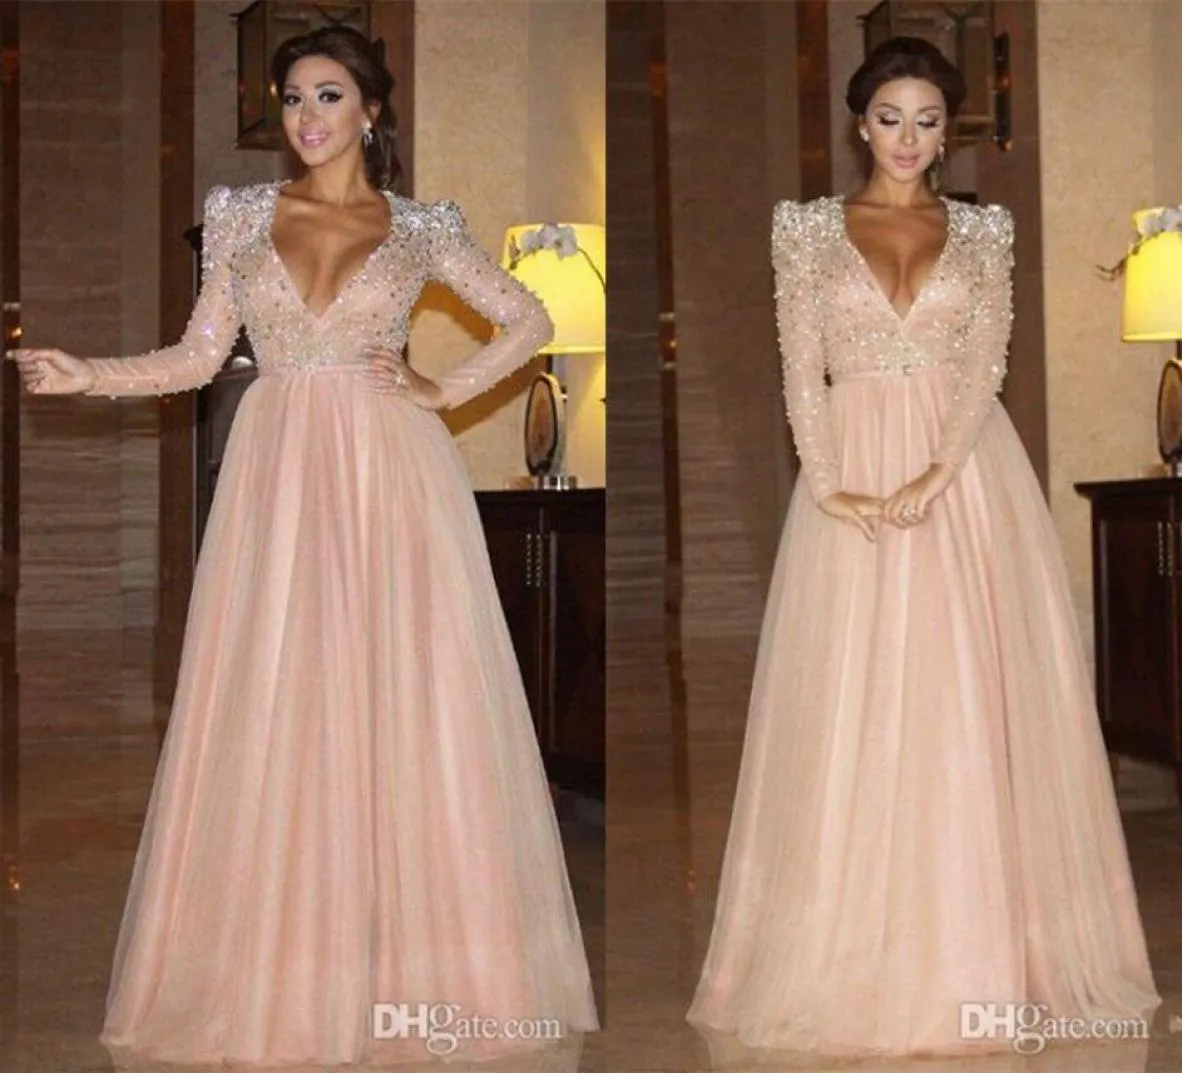 Gorgeous 2021 Dresses V Neck Long Sleeve Baby Pink A Line Evening Wear Heavy Crystal Beaded Formal Celebrity Red Carpet Prom Eveni5411873